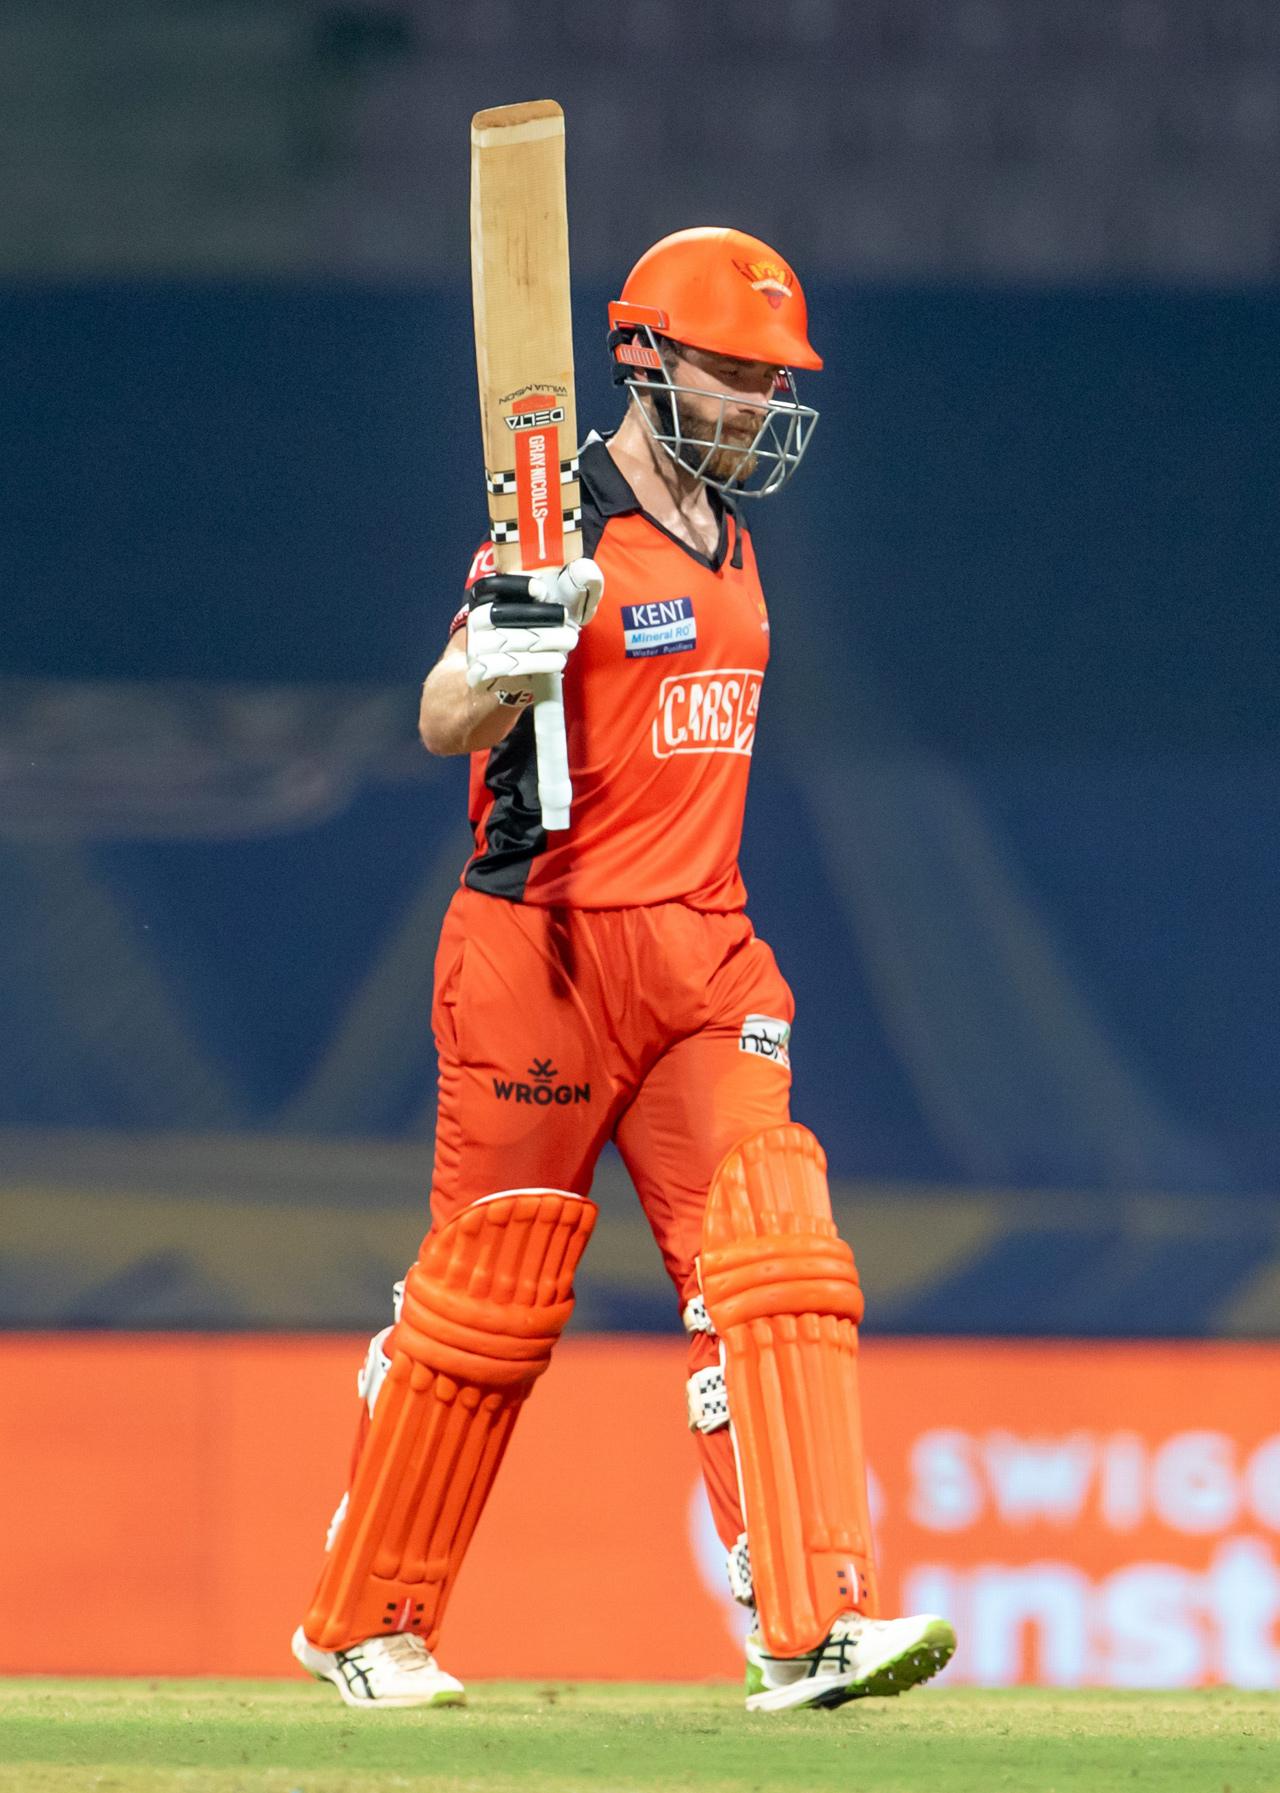 SRH skipper Kane Williamson played a well-timed innings with 57 runs coming off 46 balls. Williamson's innings included 2 boundaries and 4 sixes before he was dismissed by Pandya. He was also adjudged the man-of-the-match